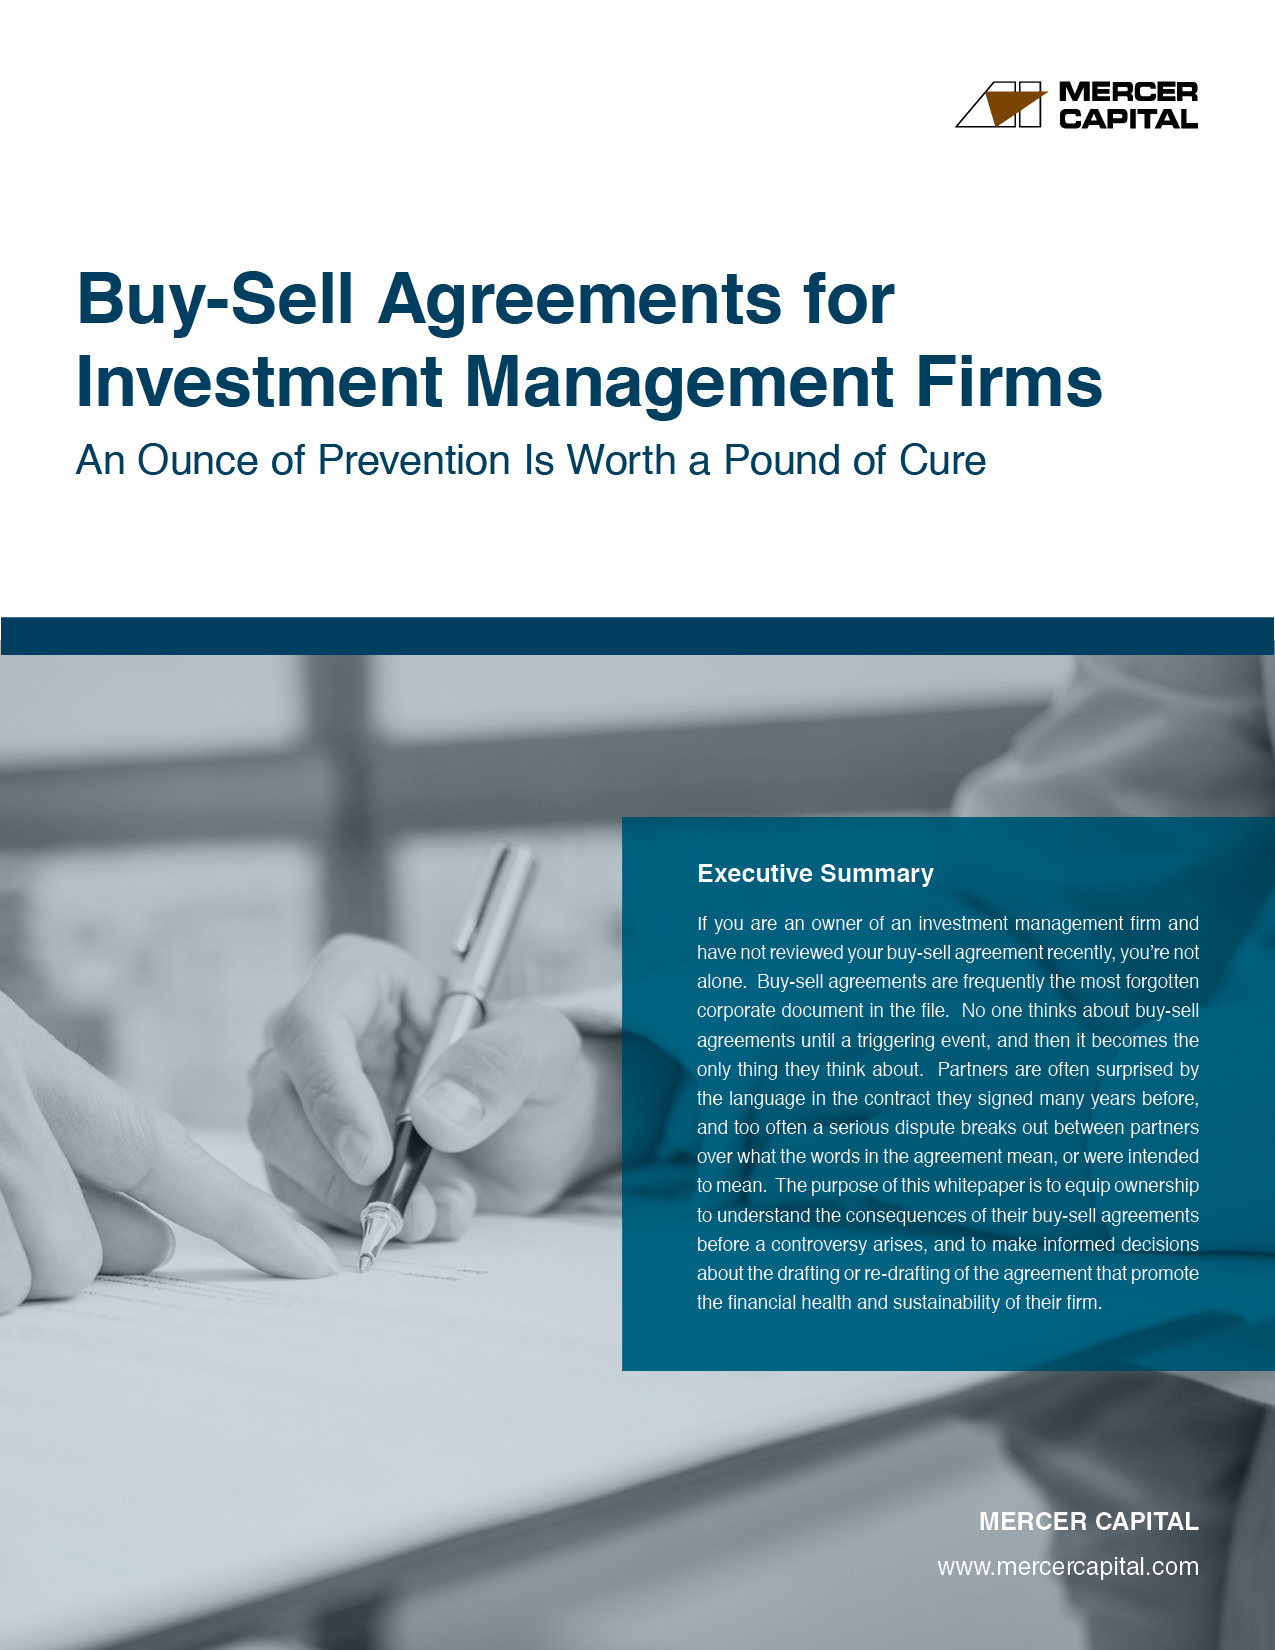 Investment Management Agreement Buy Sell Agreements For Investment Management Firms An Ounce Of